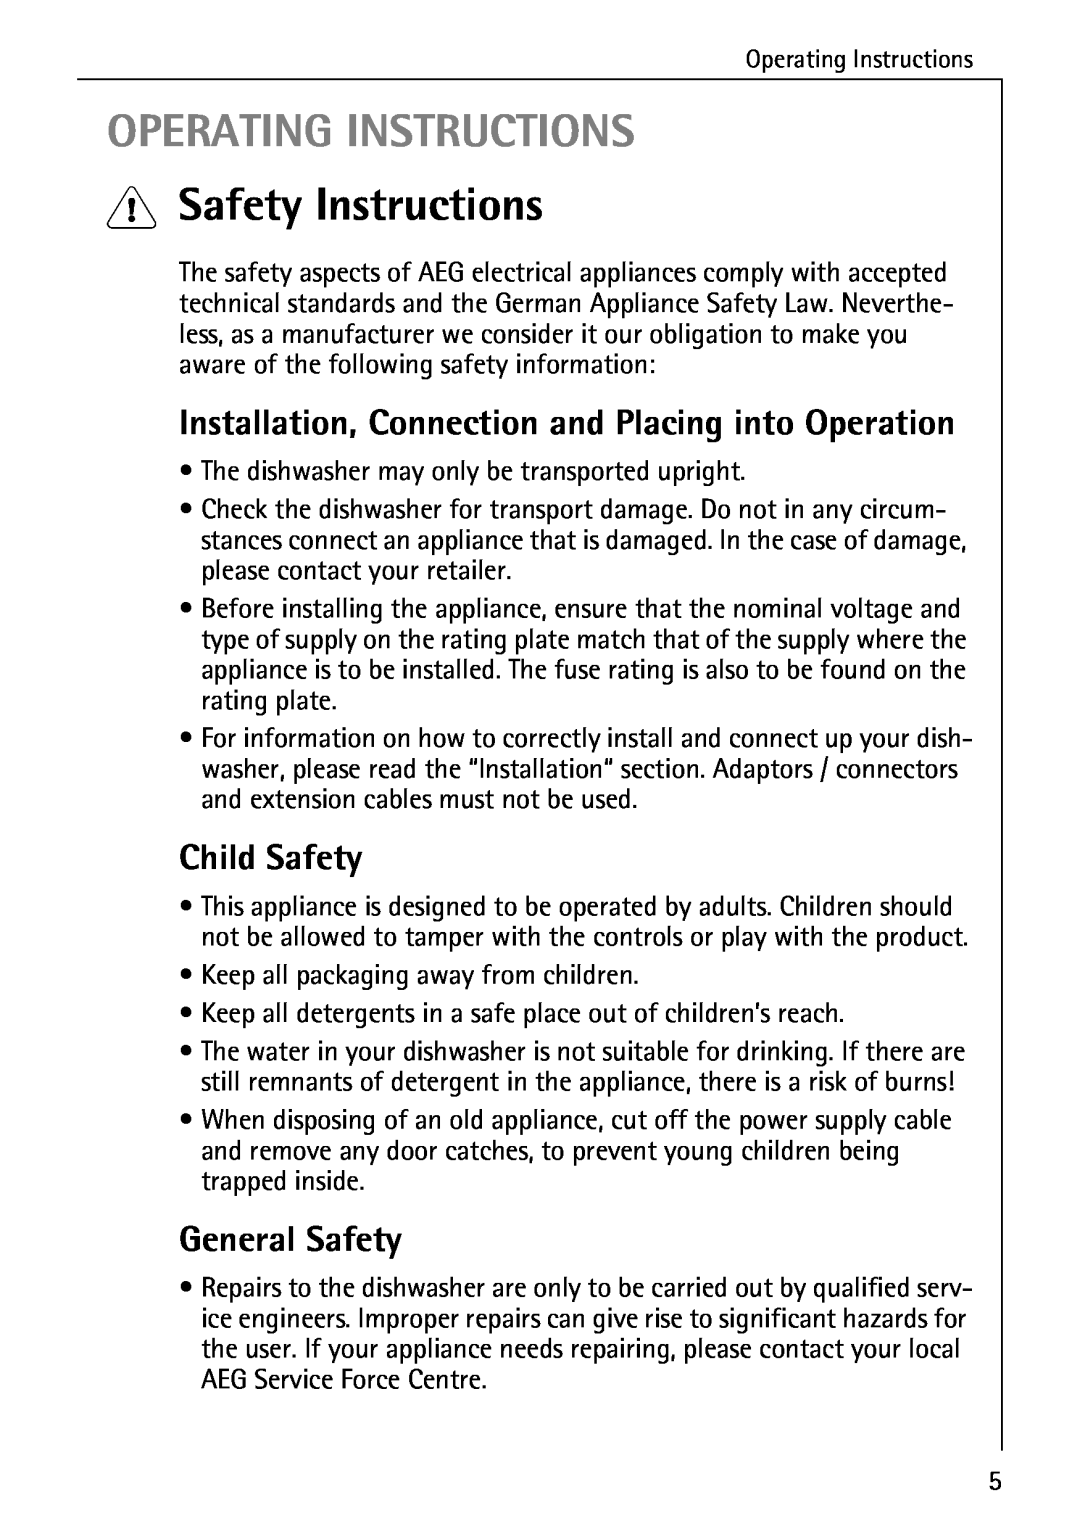 AEG 40740 Operating Instructions, Safety Instructions, Installation, Connection and Placing into Operation, Child Safety 